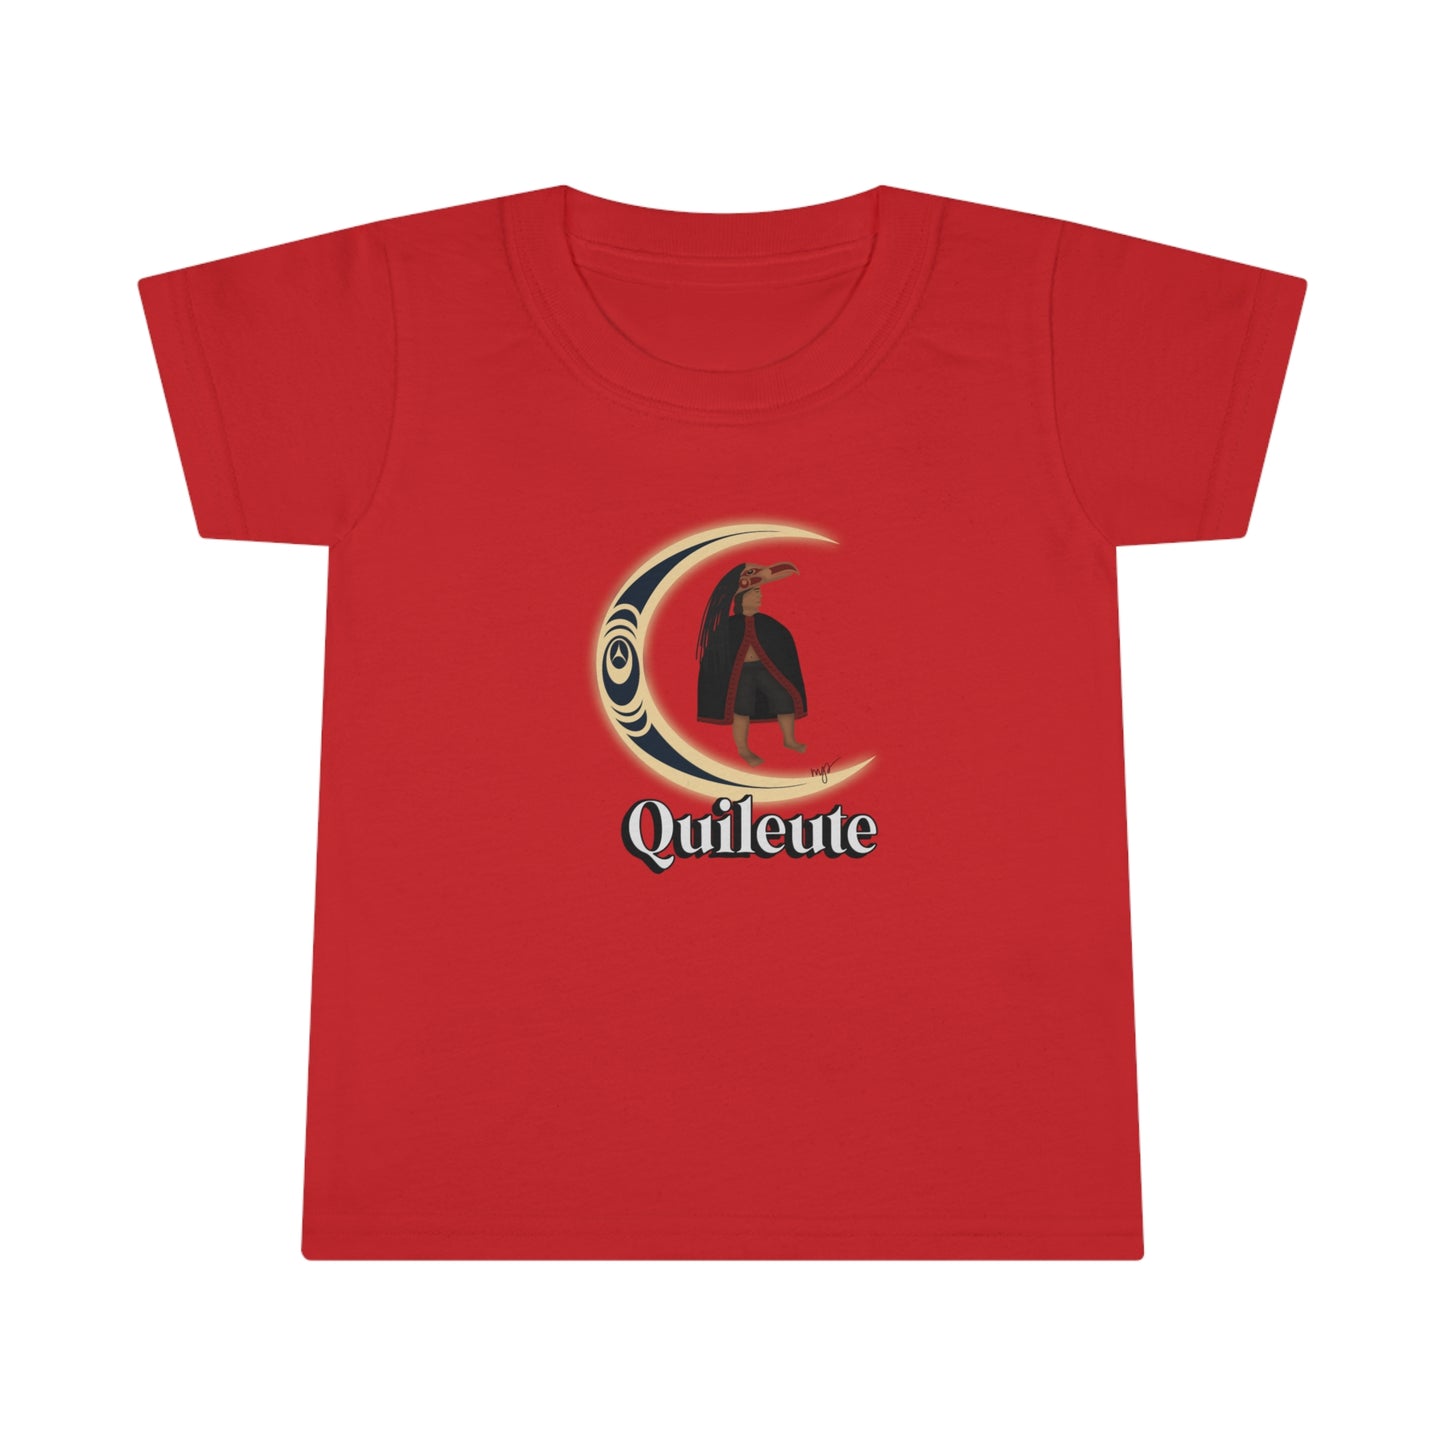 Toddler Quileute Dancer Tee